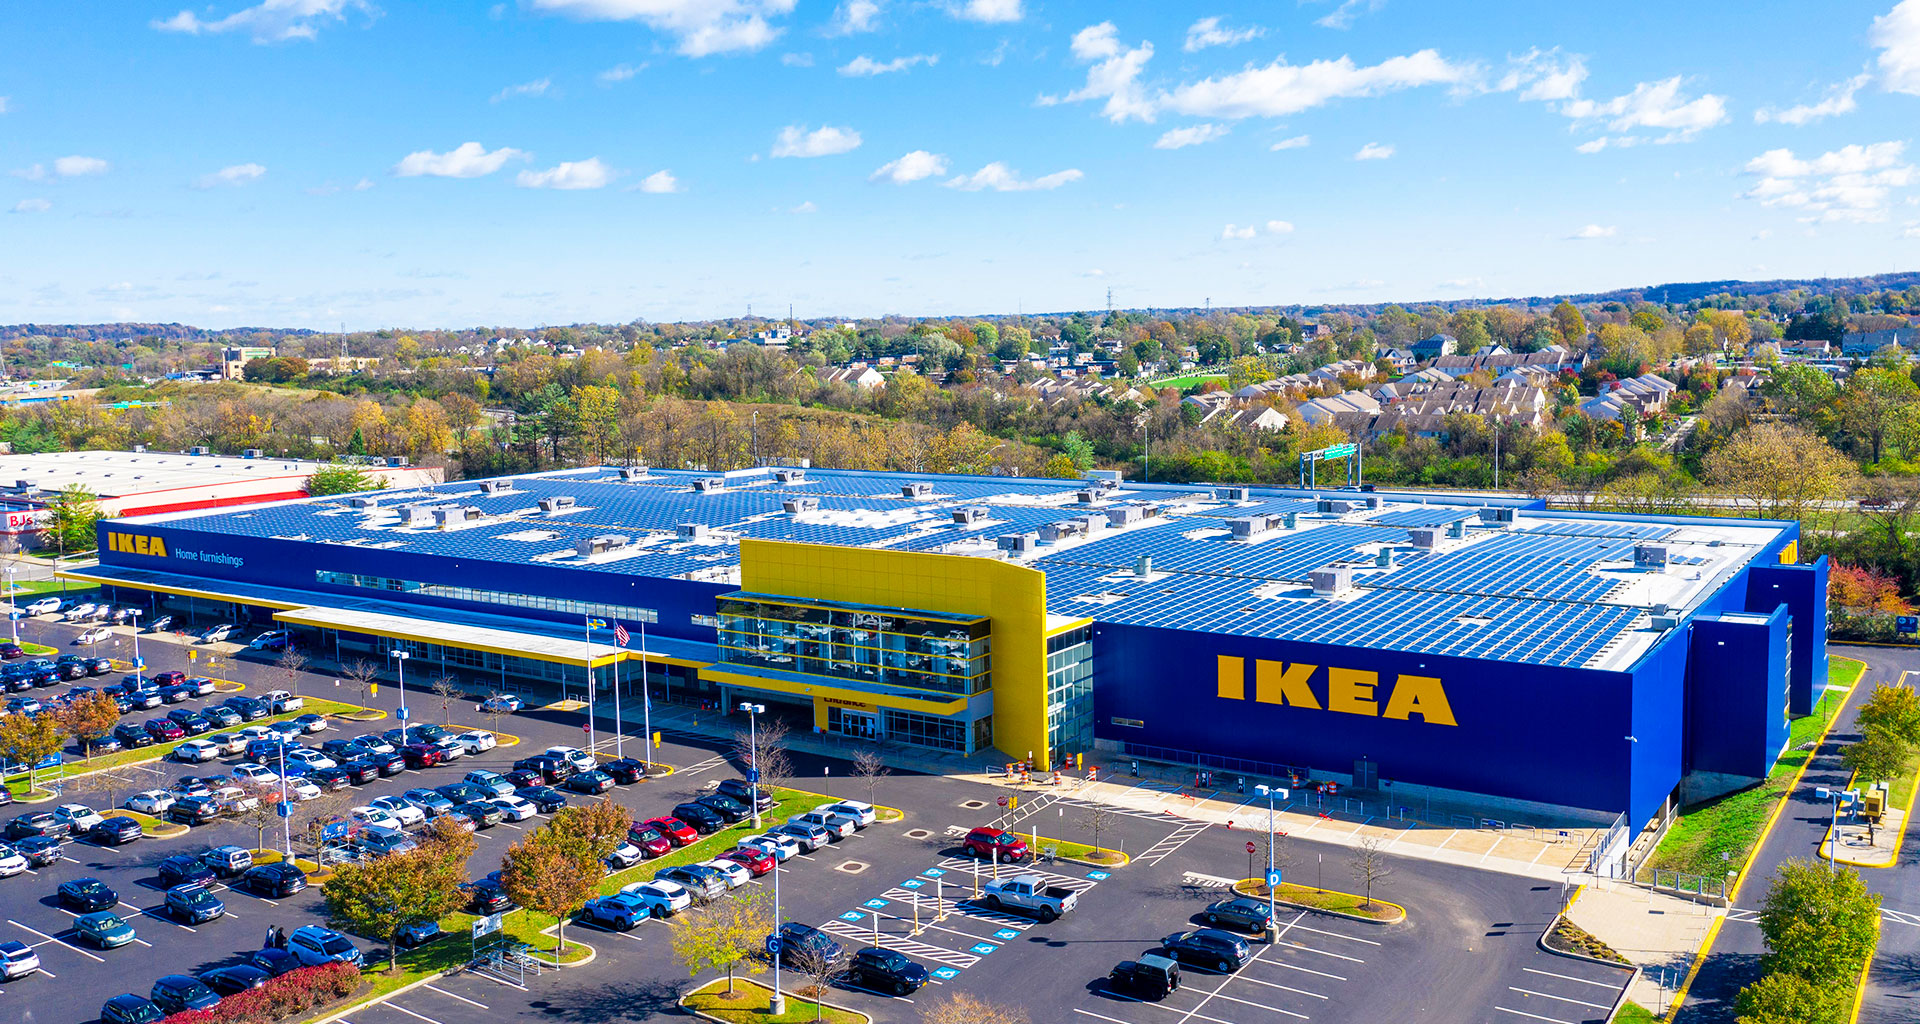 Market Place at Plymouth and Ikea – North America